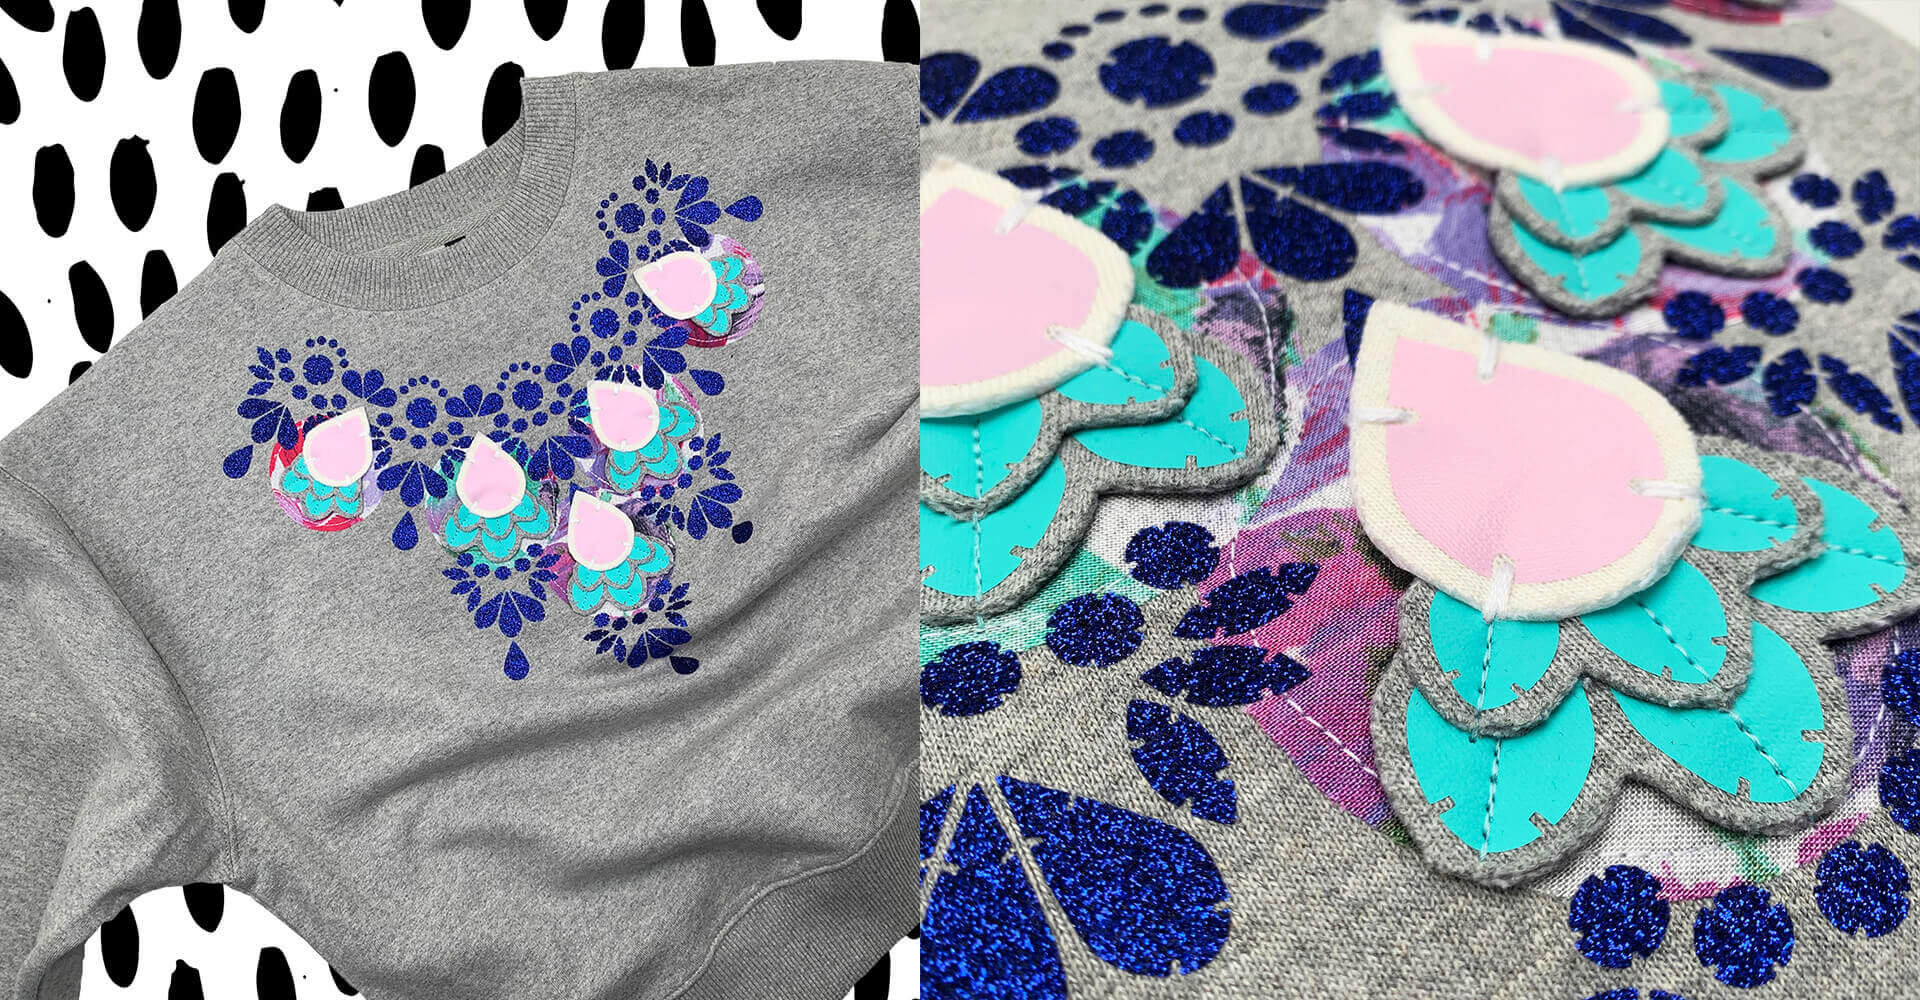 Two photos of a grey sweatshirt with glittery blue, turquoise and lavender embellishments. The right hand photo is a close up and shows the textured details while the image on the left shows more of the full garment